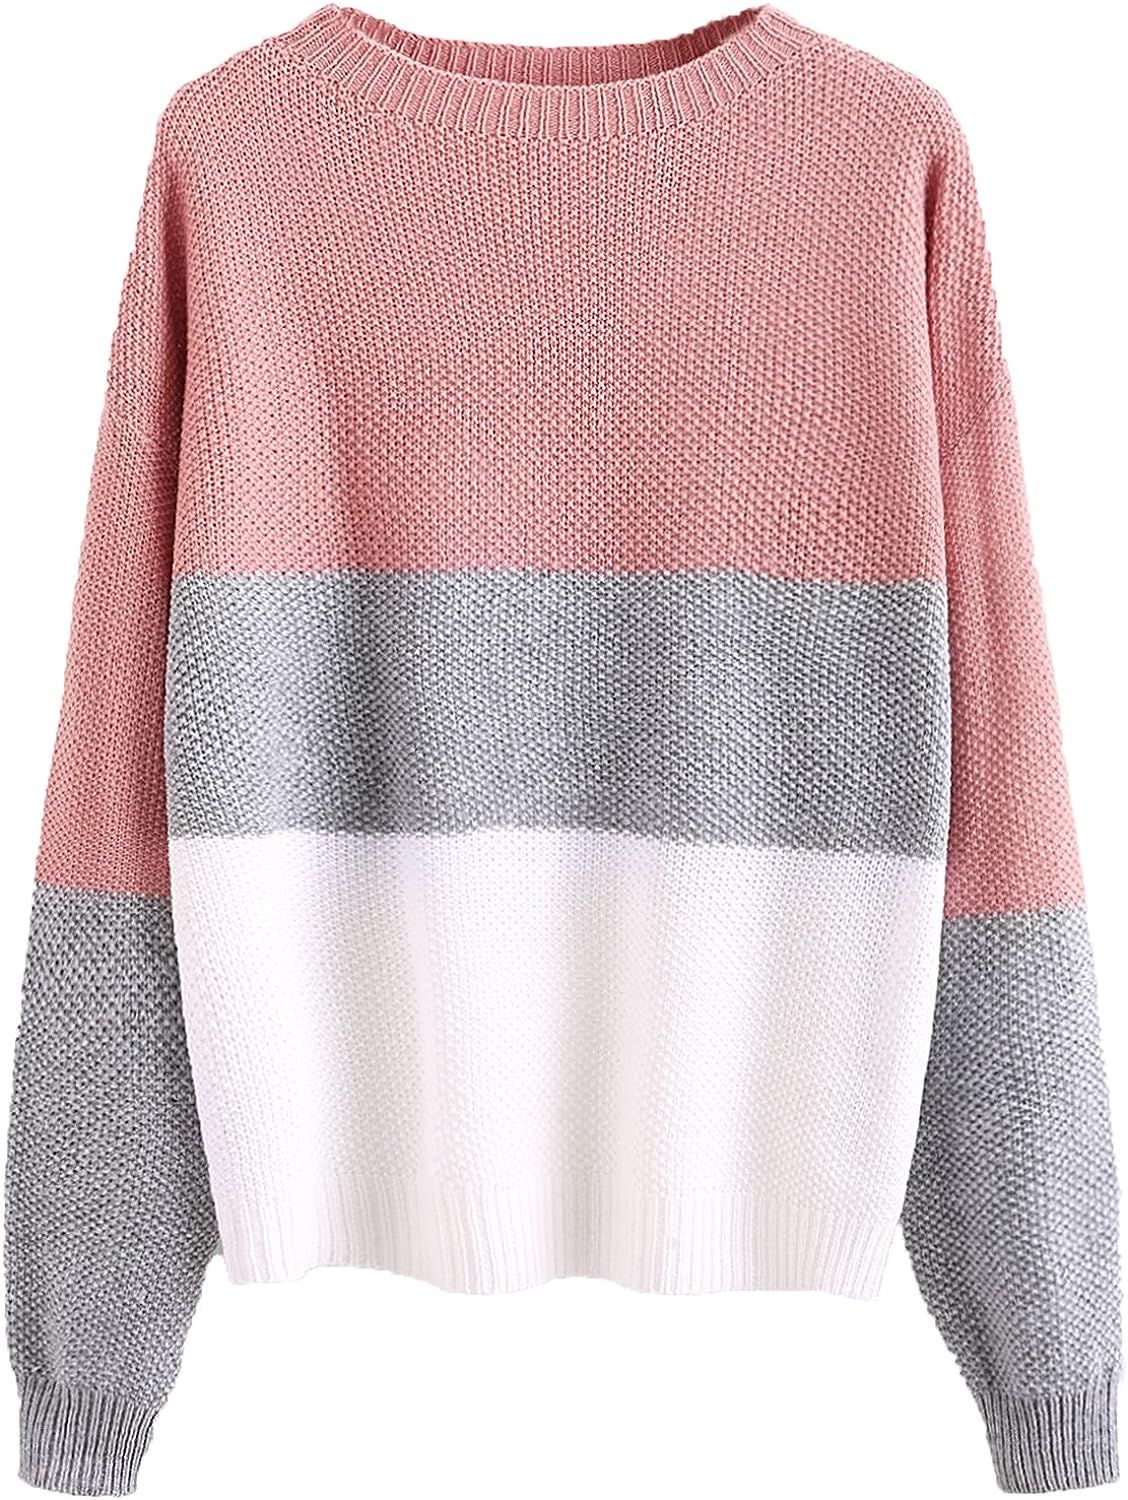 Milumia Women's Casual Drop Shoulder Color Block Striped Knitted Textured Jumper Sweater | Amazon (US)